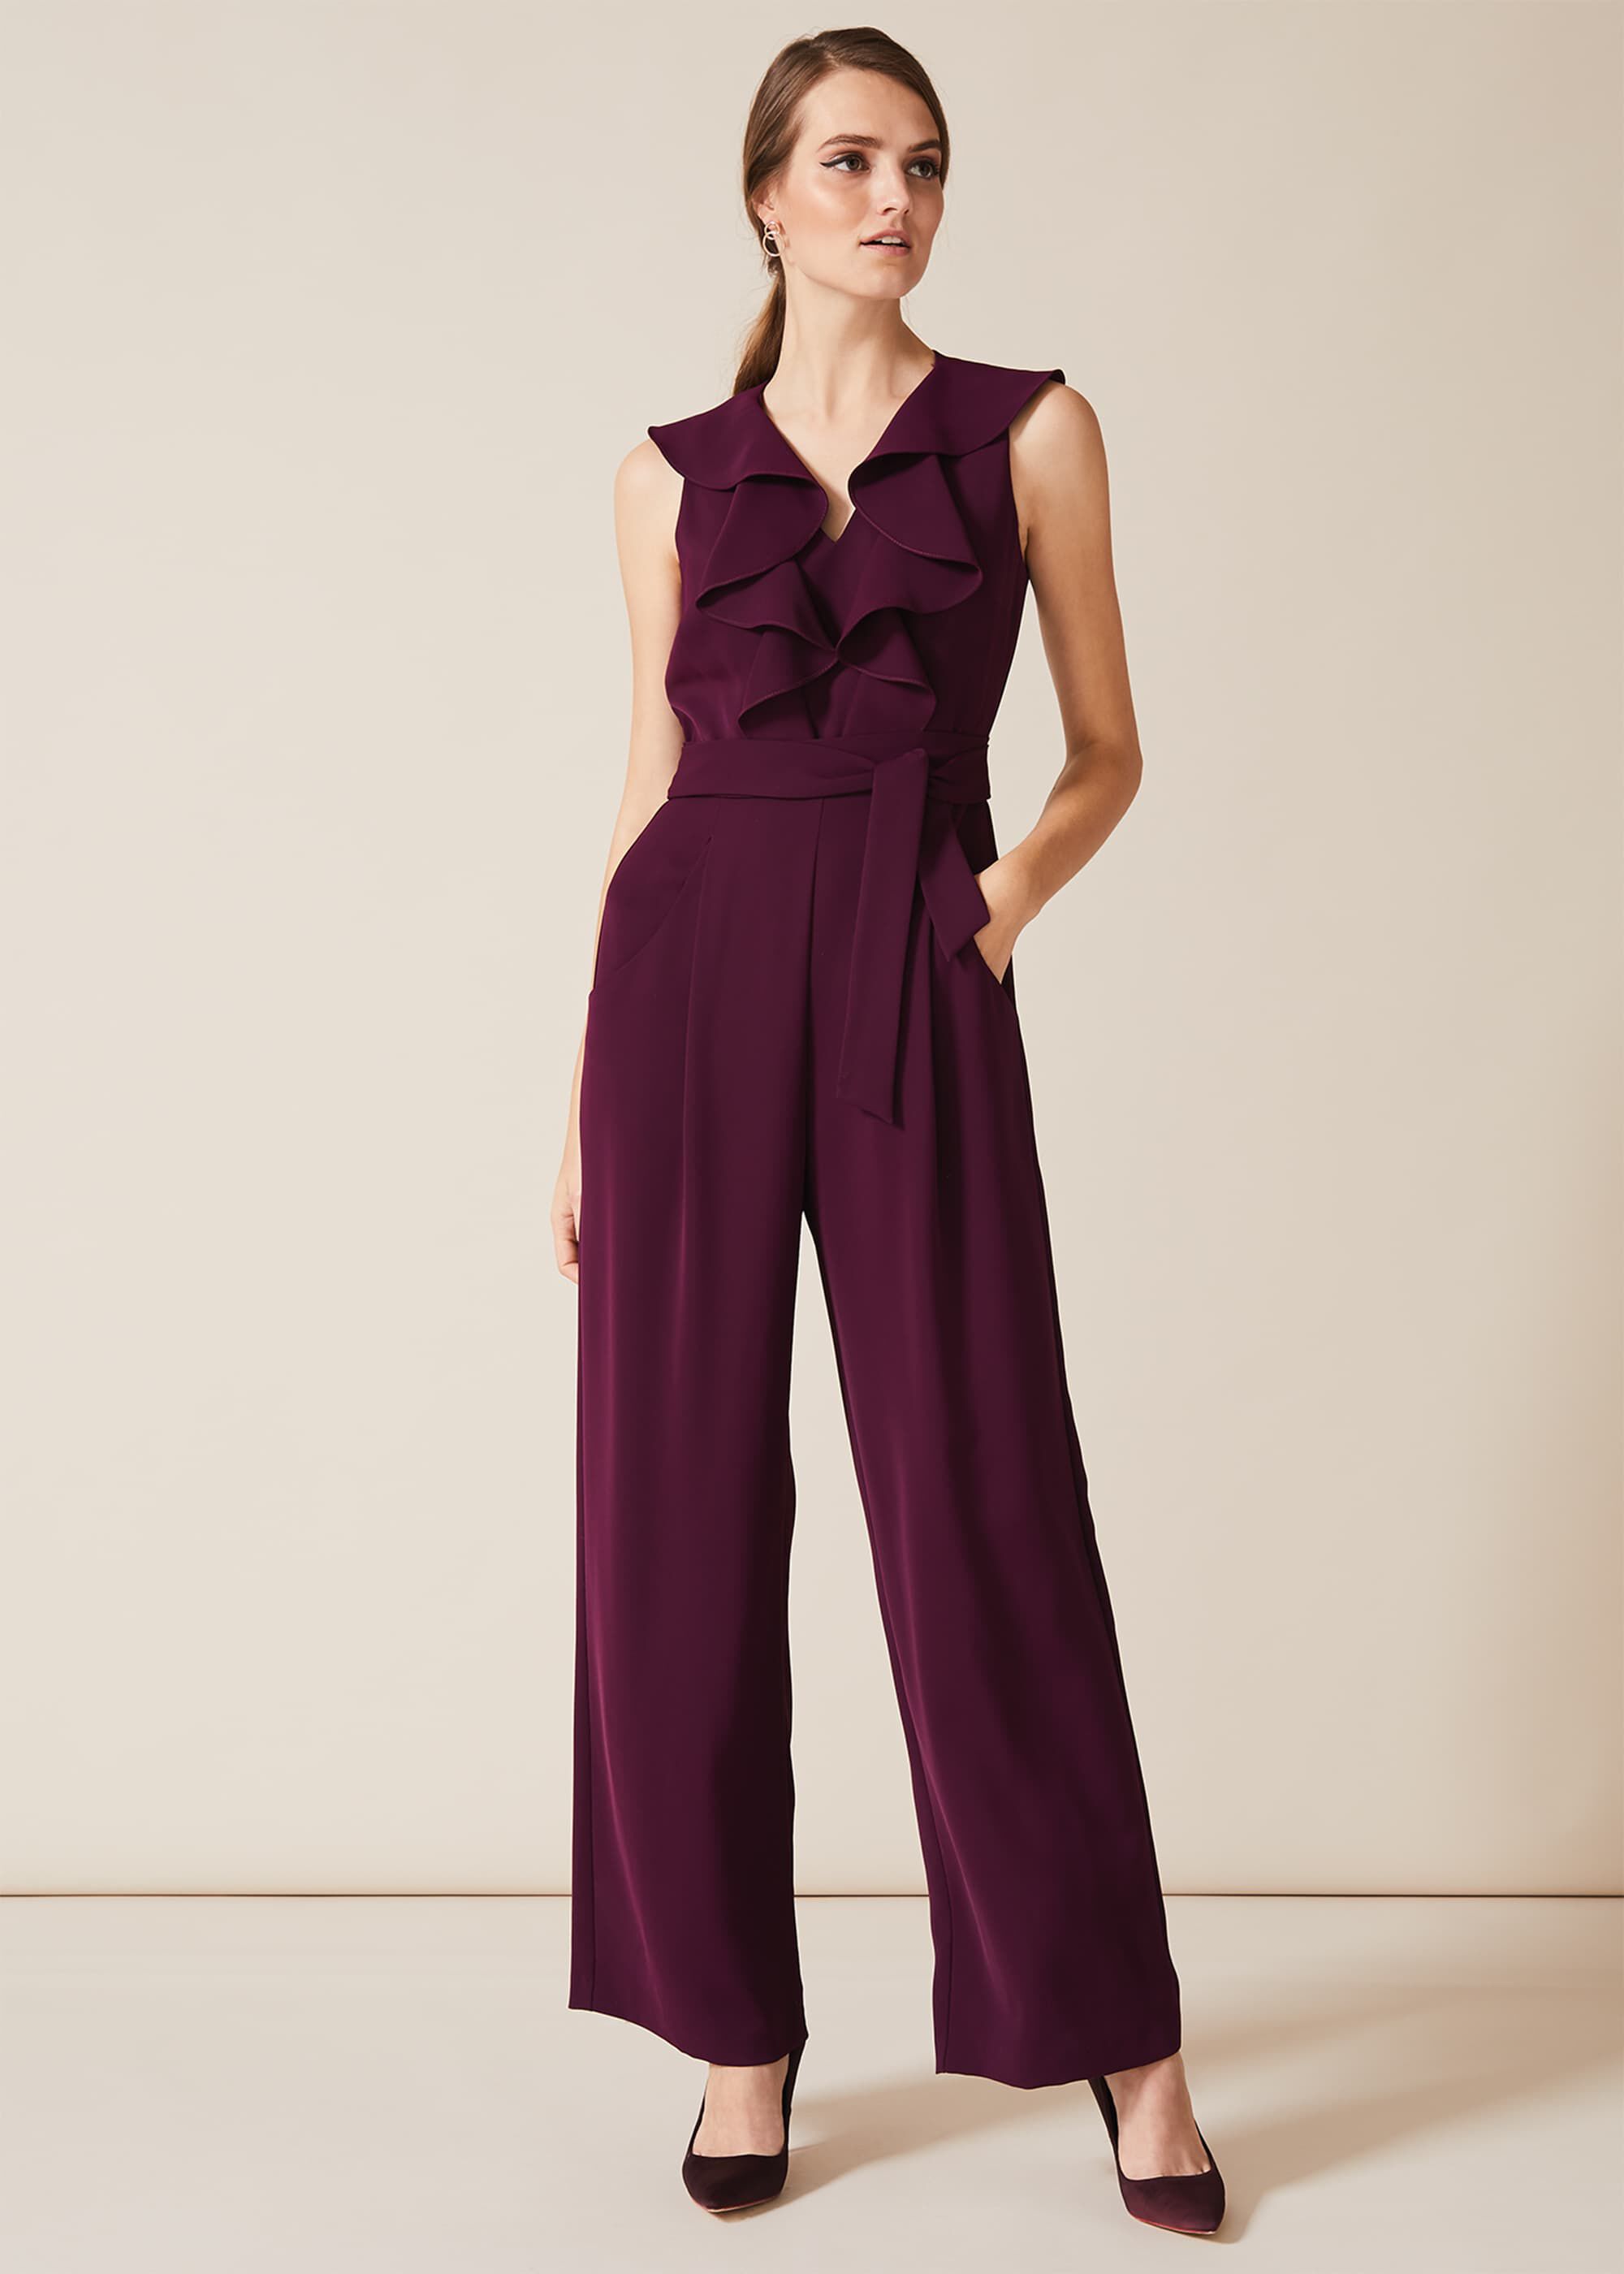 Phase Eight Jumpsuit Top Sellers, UP TO 56% OFF | lavalldelord.com